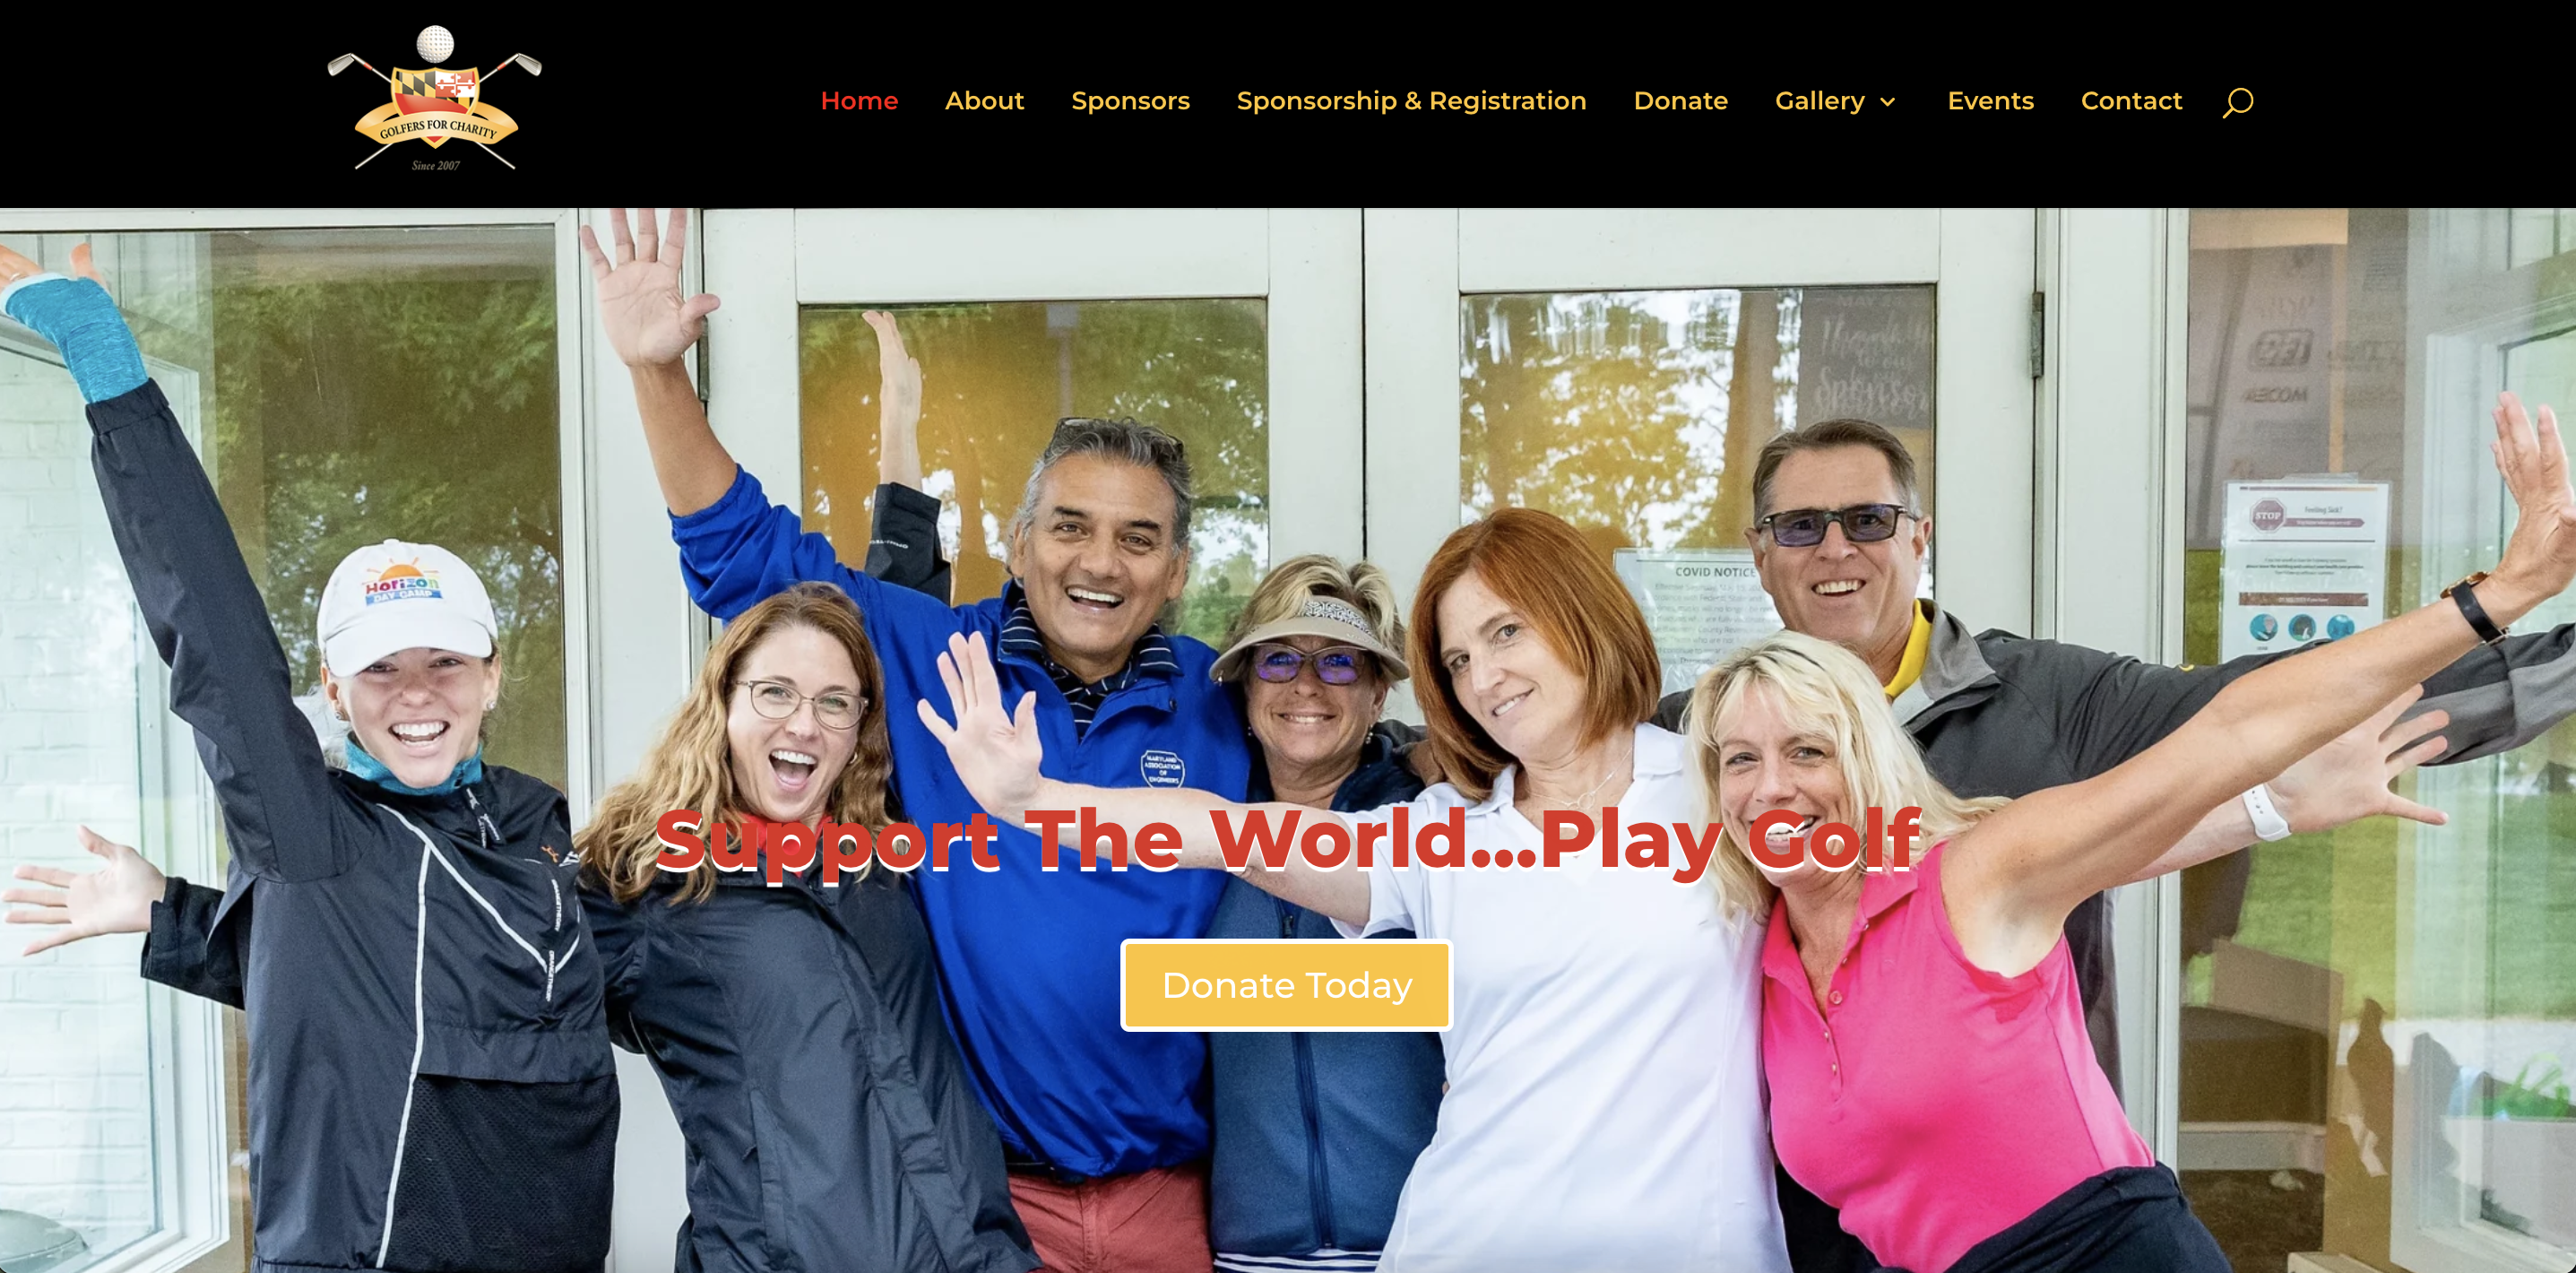 Golfers For Charity Website Homepage